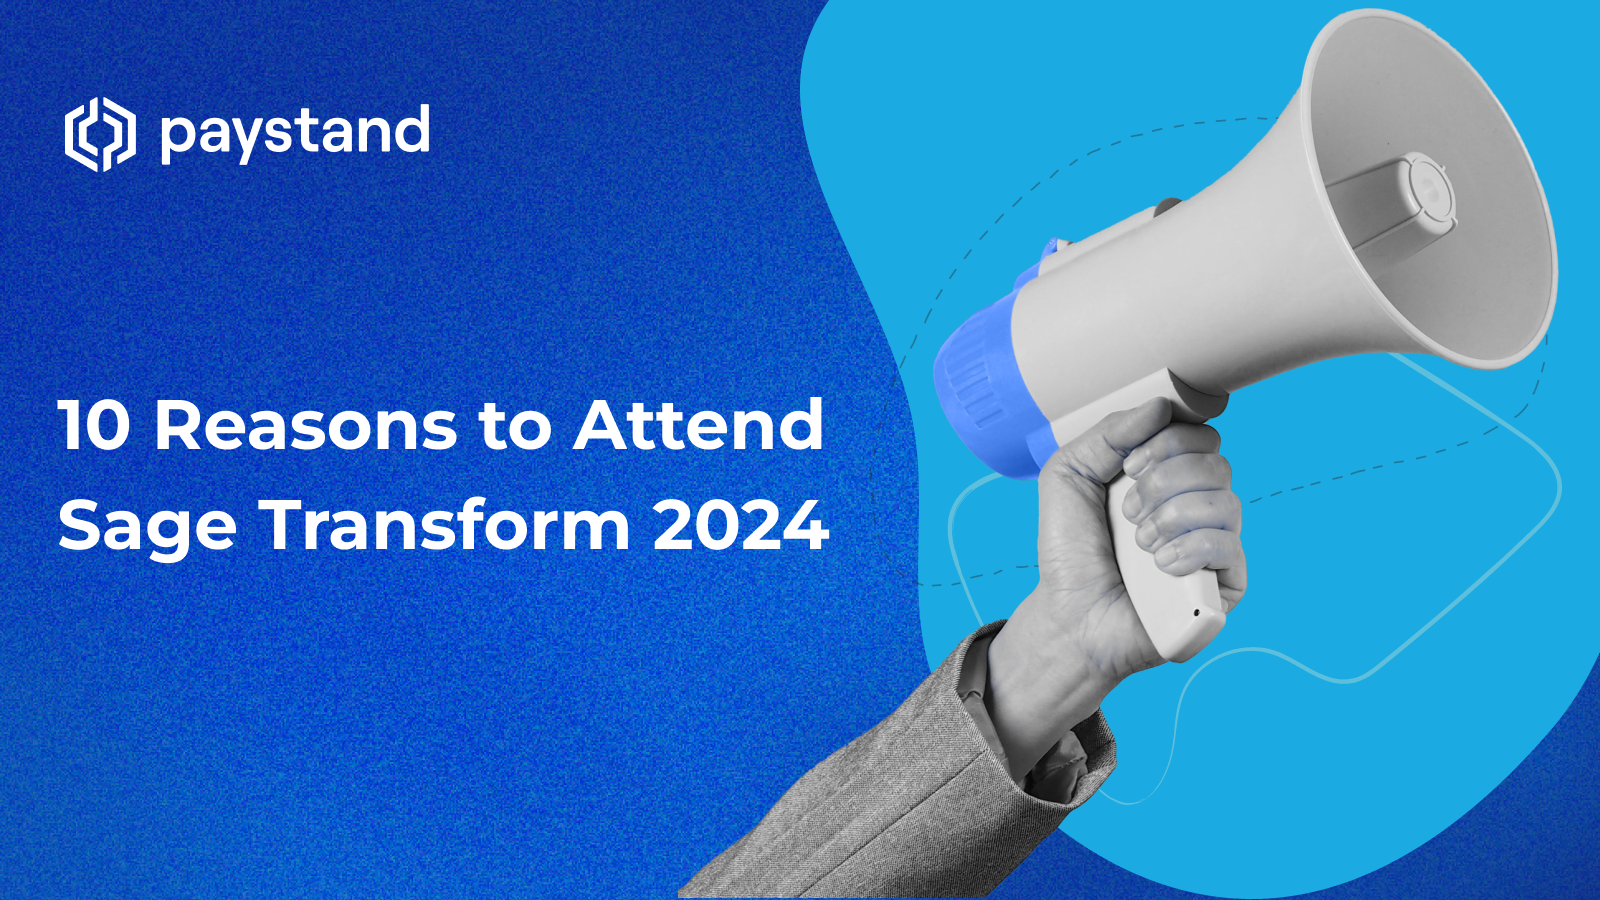 10 Reasons to Attend Sage Transform 2024